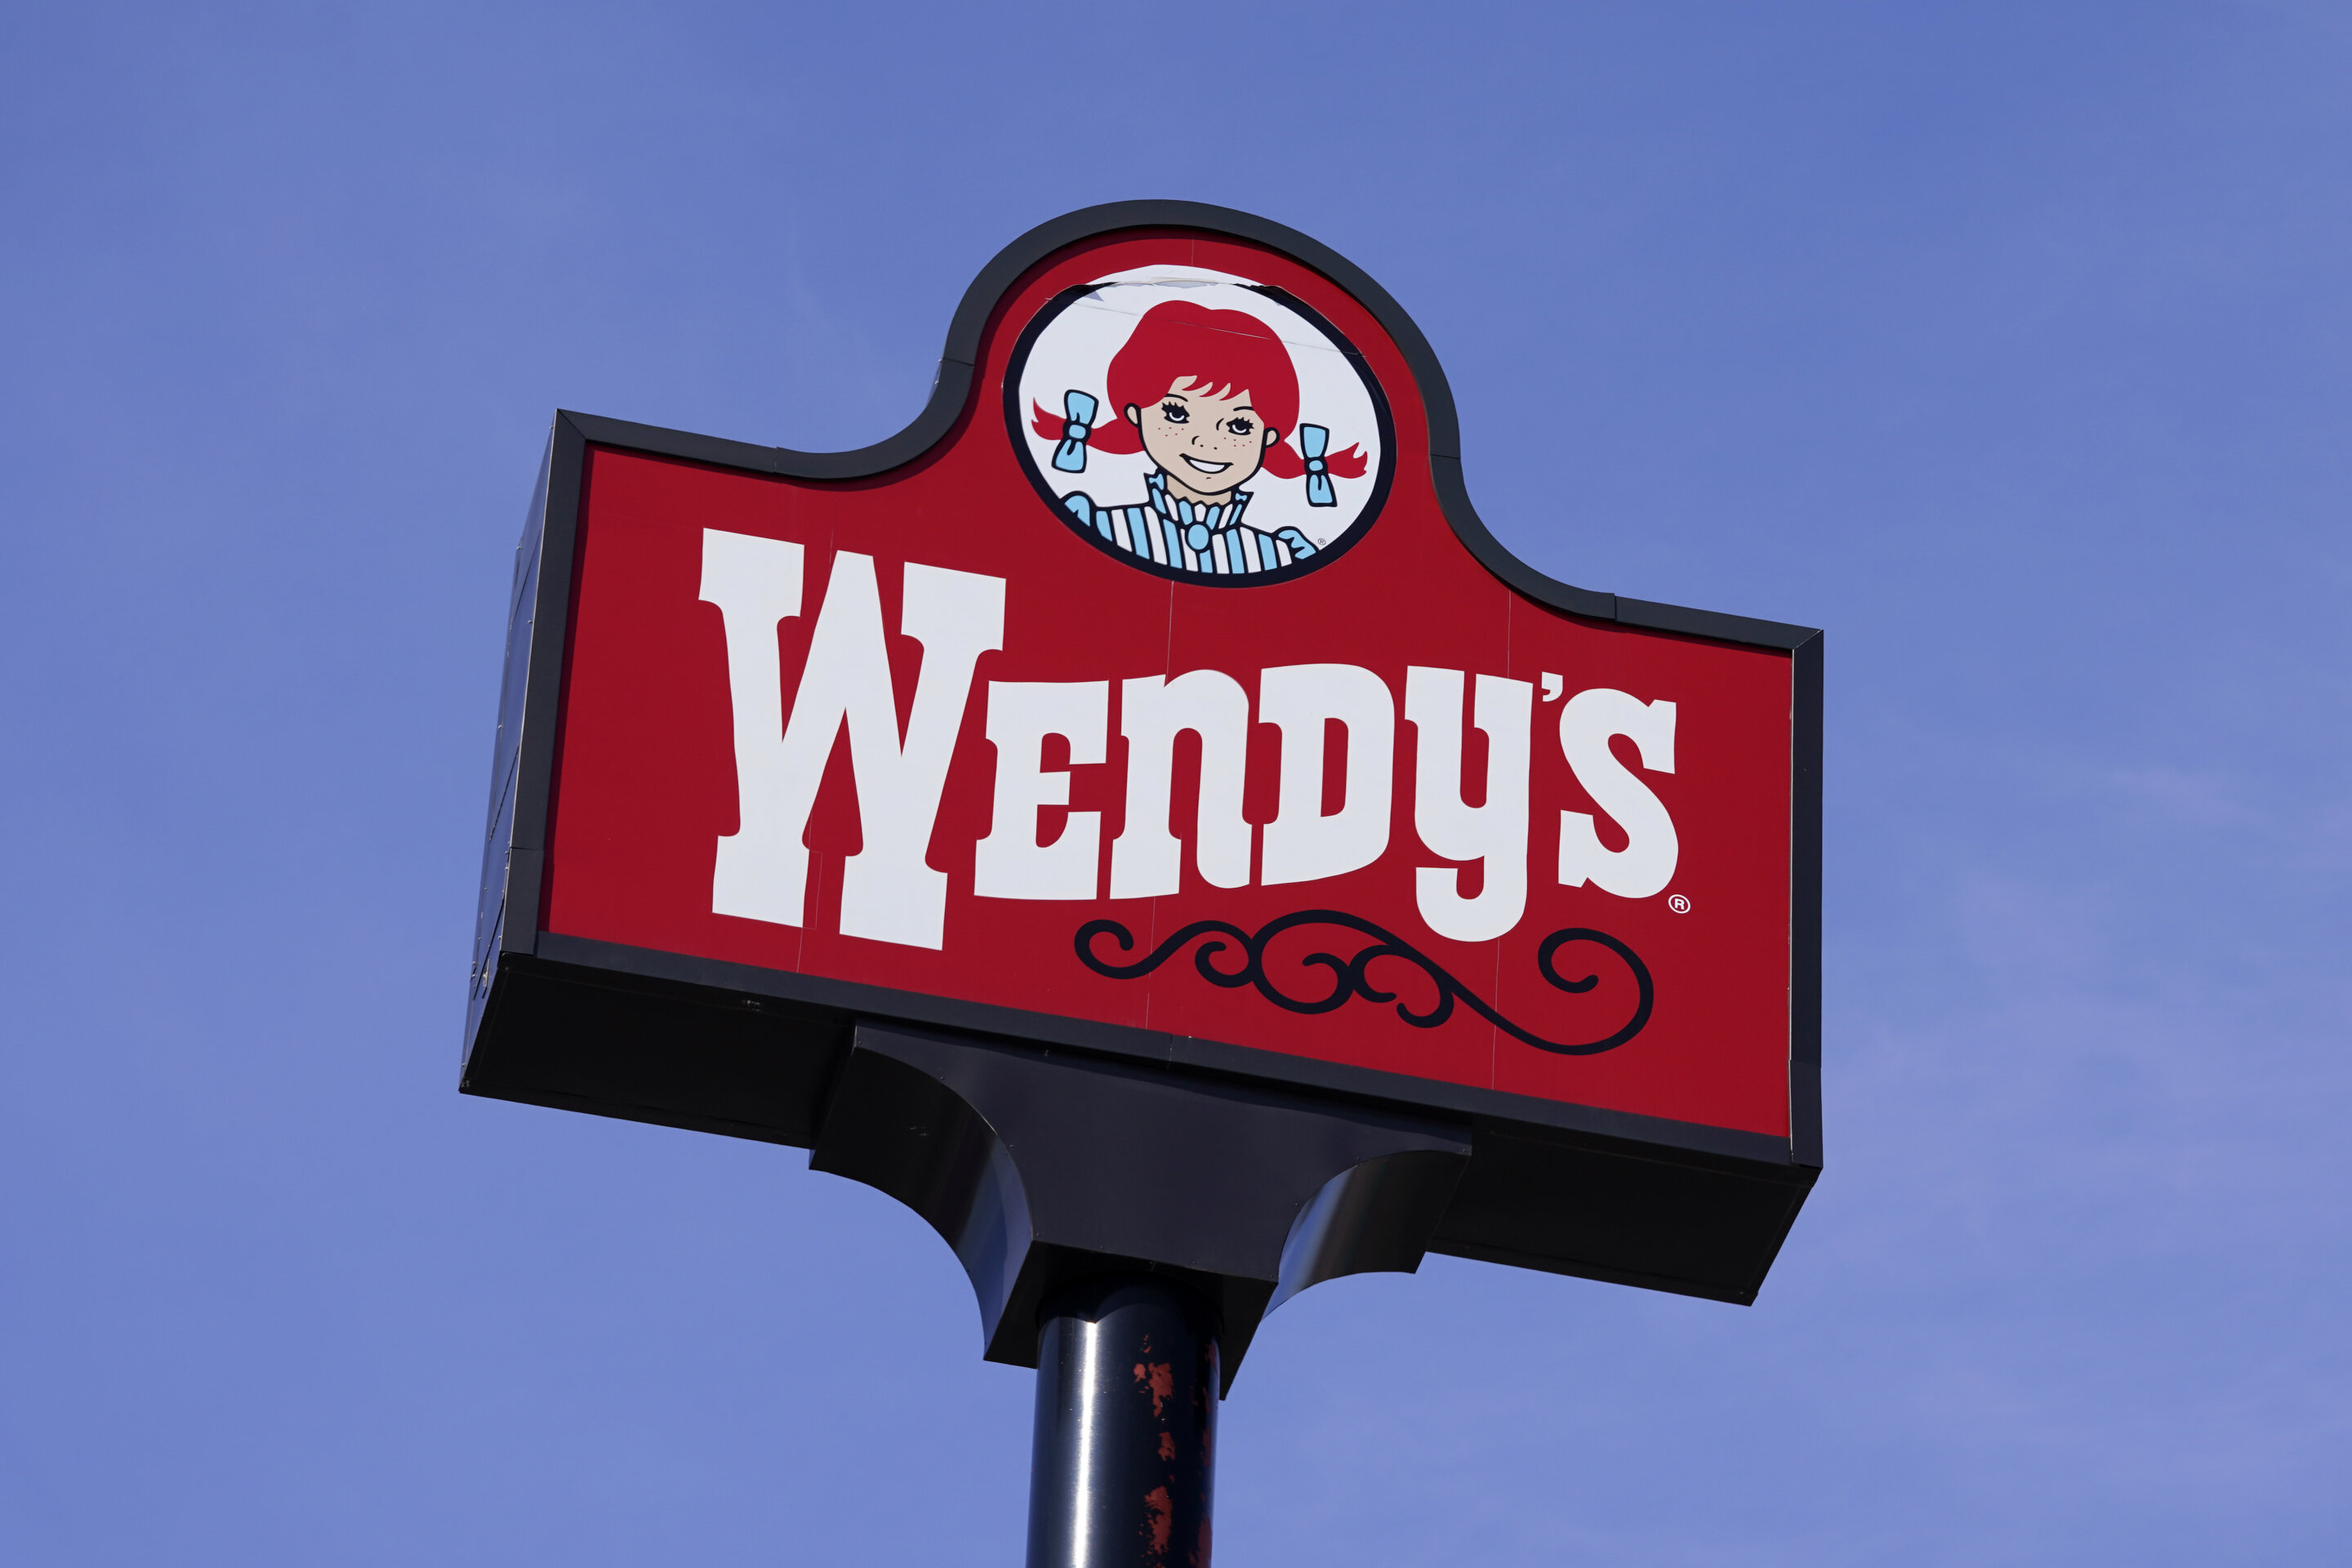 #Wendy’s pulls lettuce from sandwiches amid E. coli outbreak